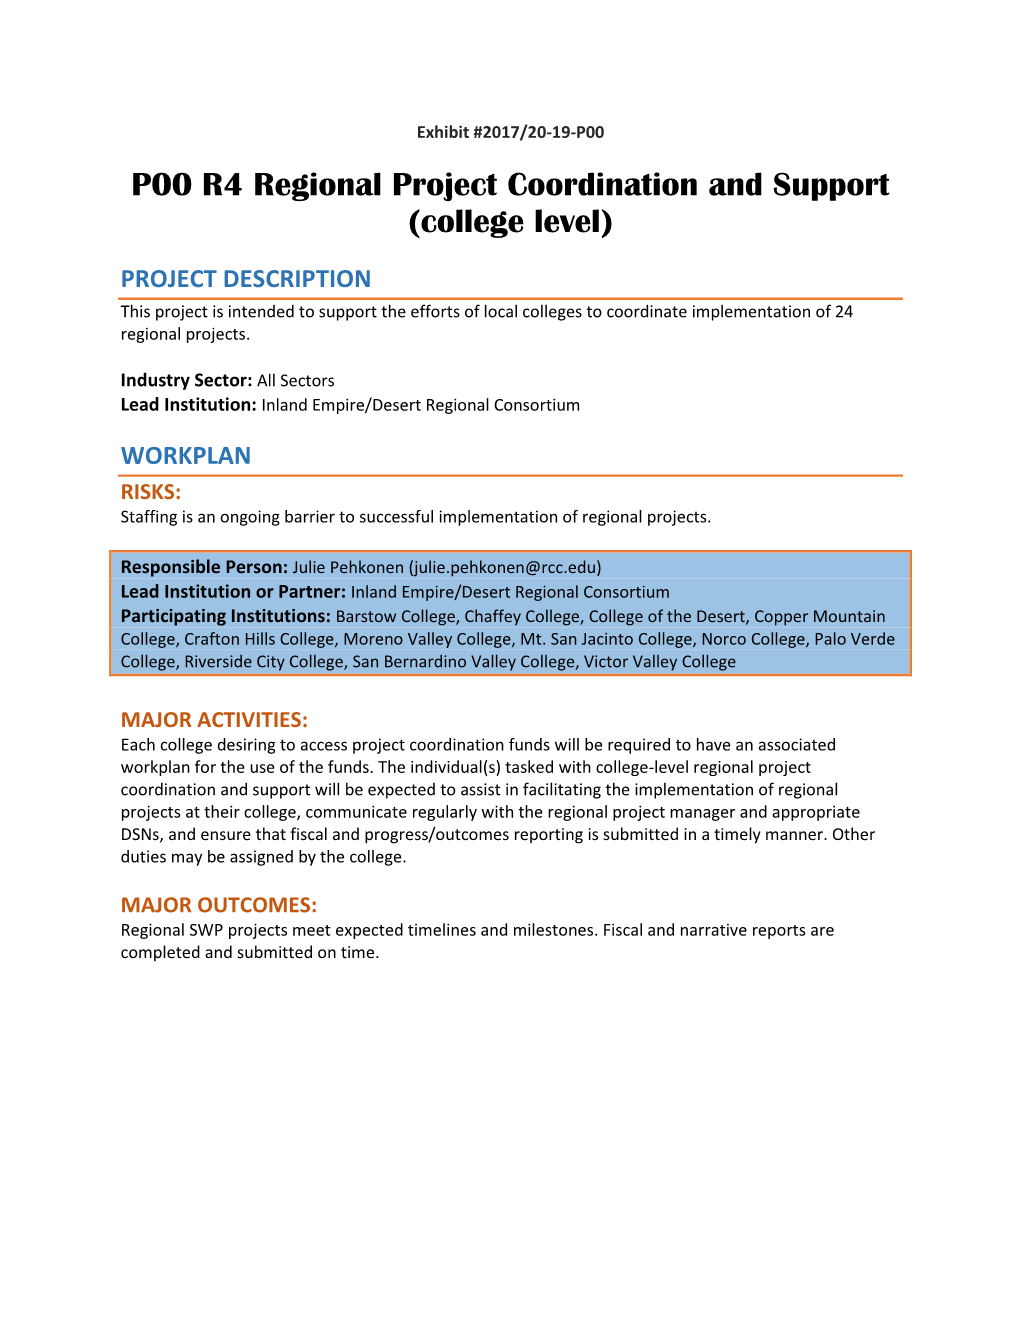 P00 R4 Regional Project Coordination and Support (College Level)